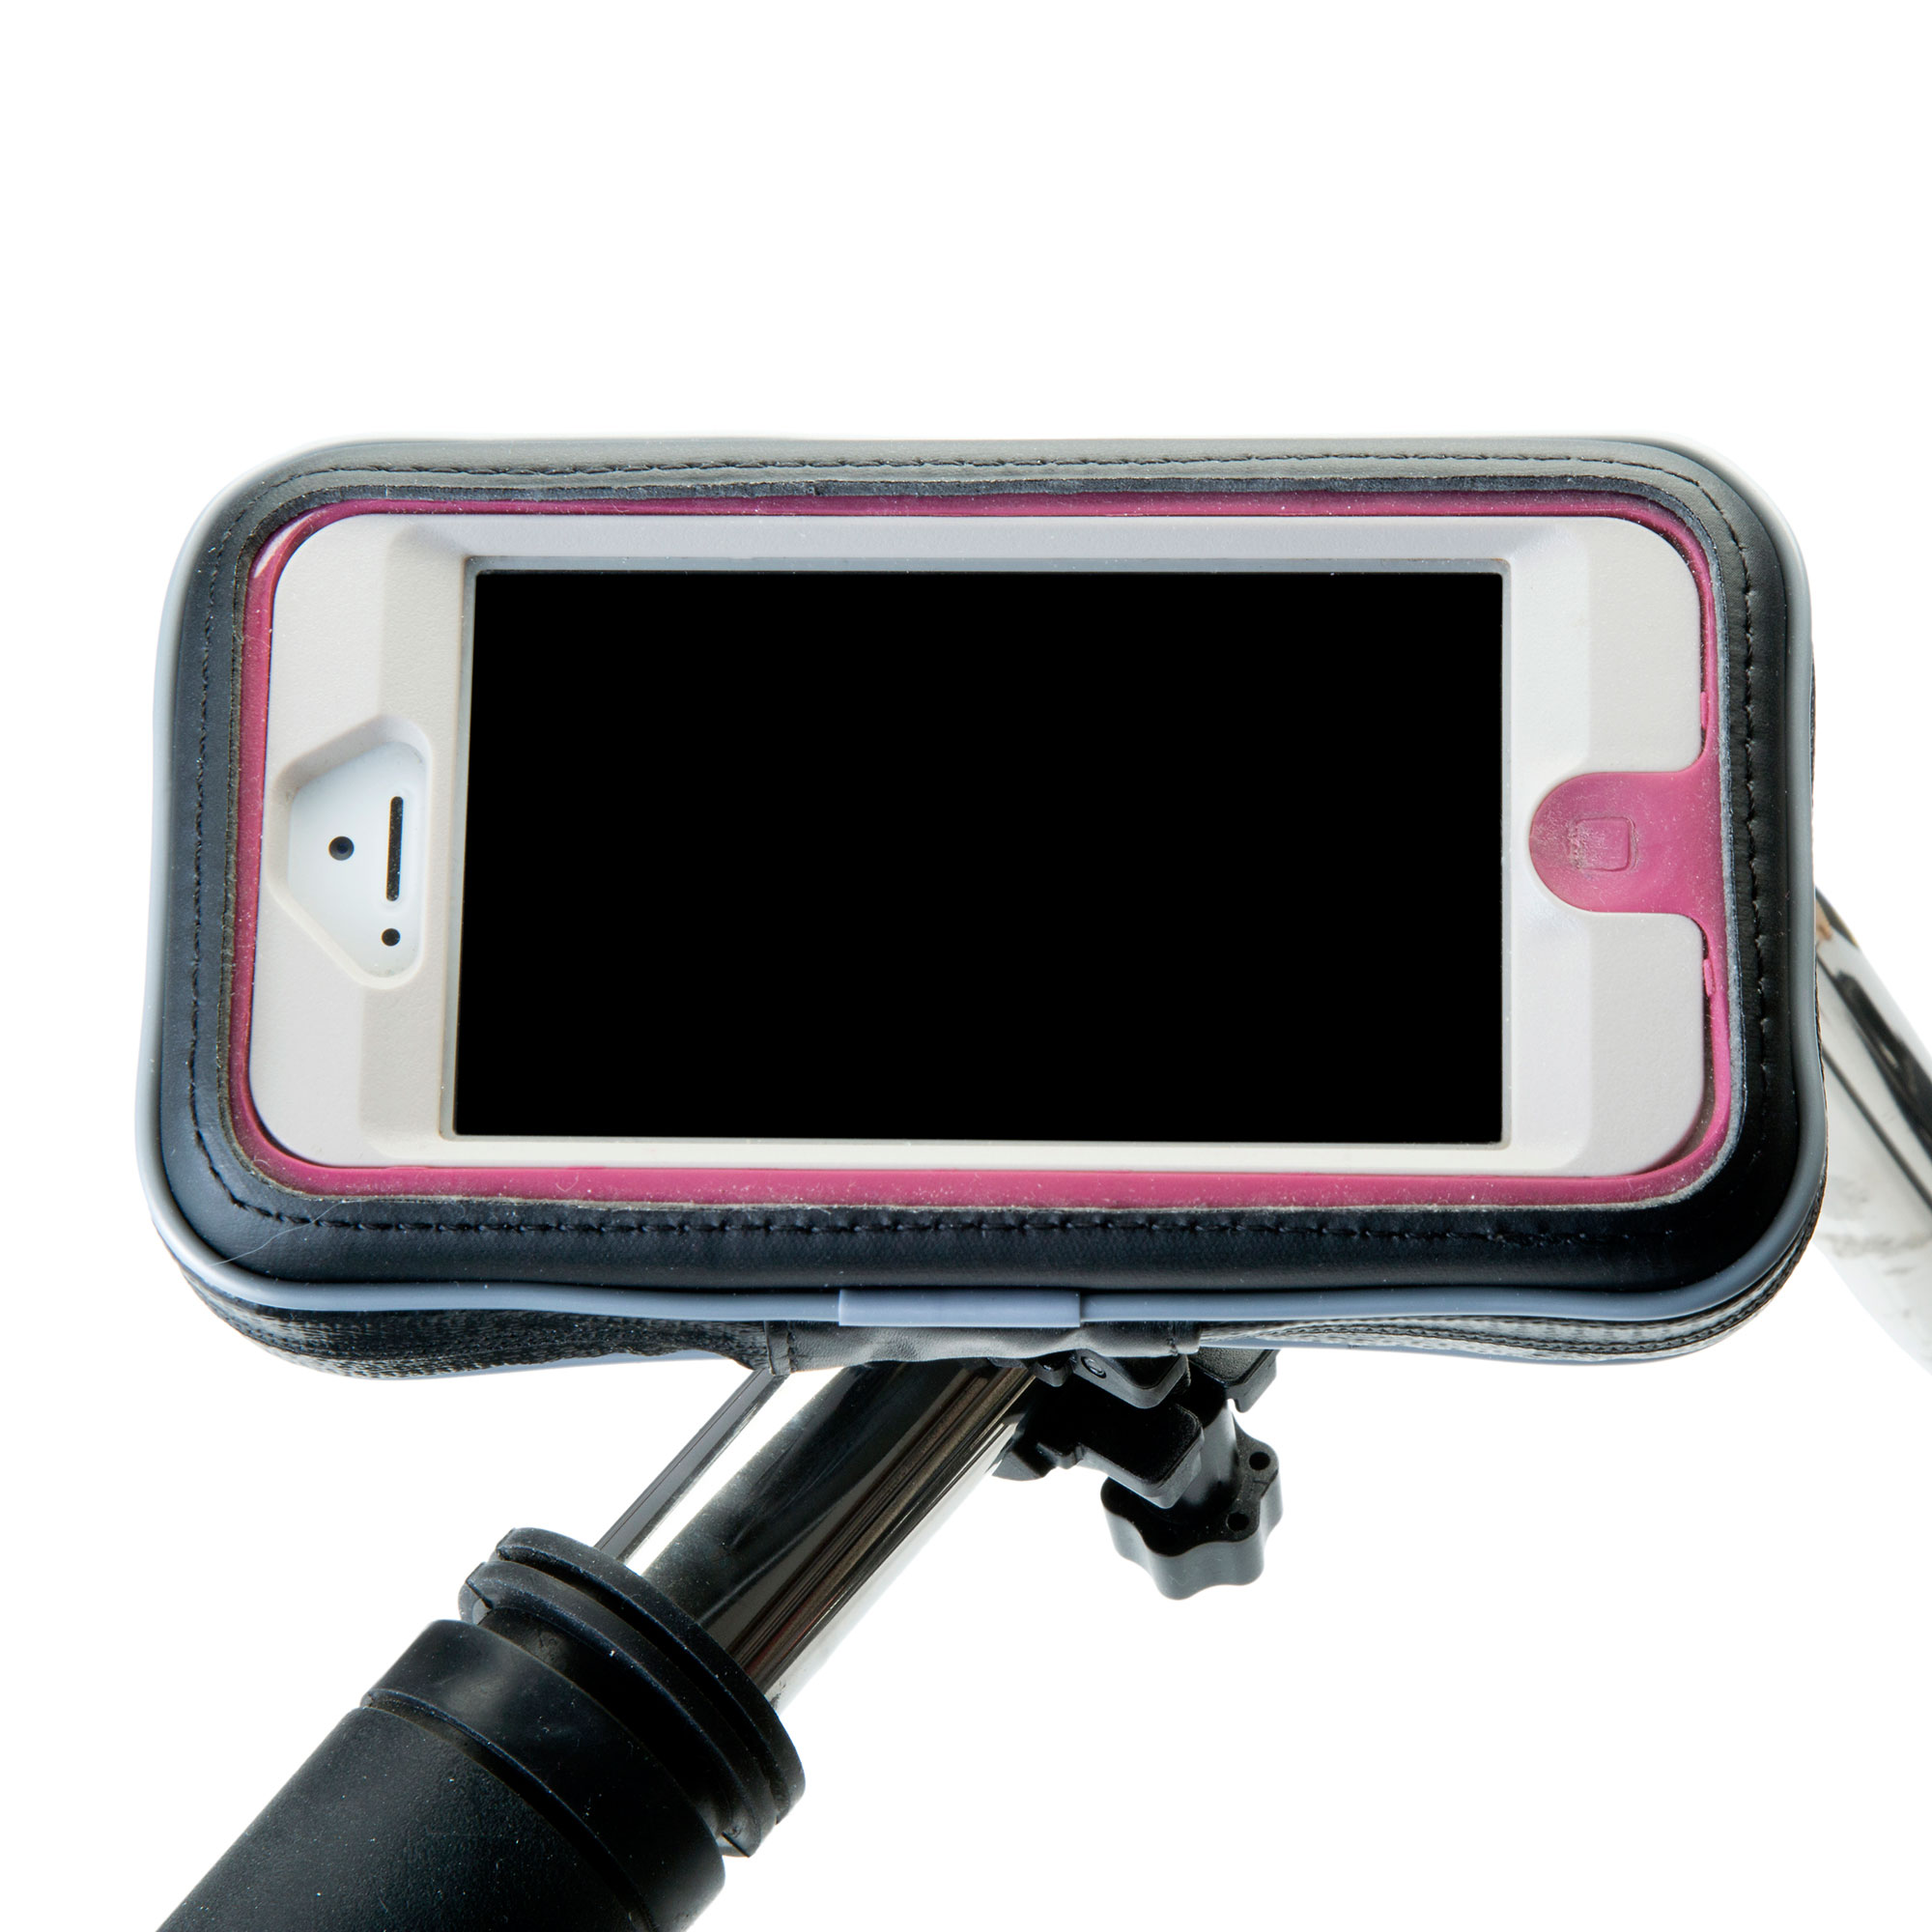 Heavy Duty Weather Resistant Bicycle / Motorcycle Handlebar Mount Holder Designed for the Pantech CDM8999